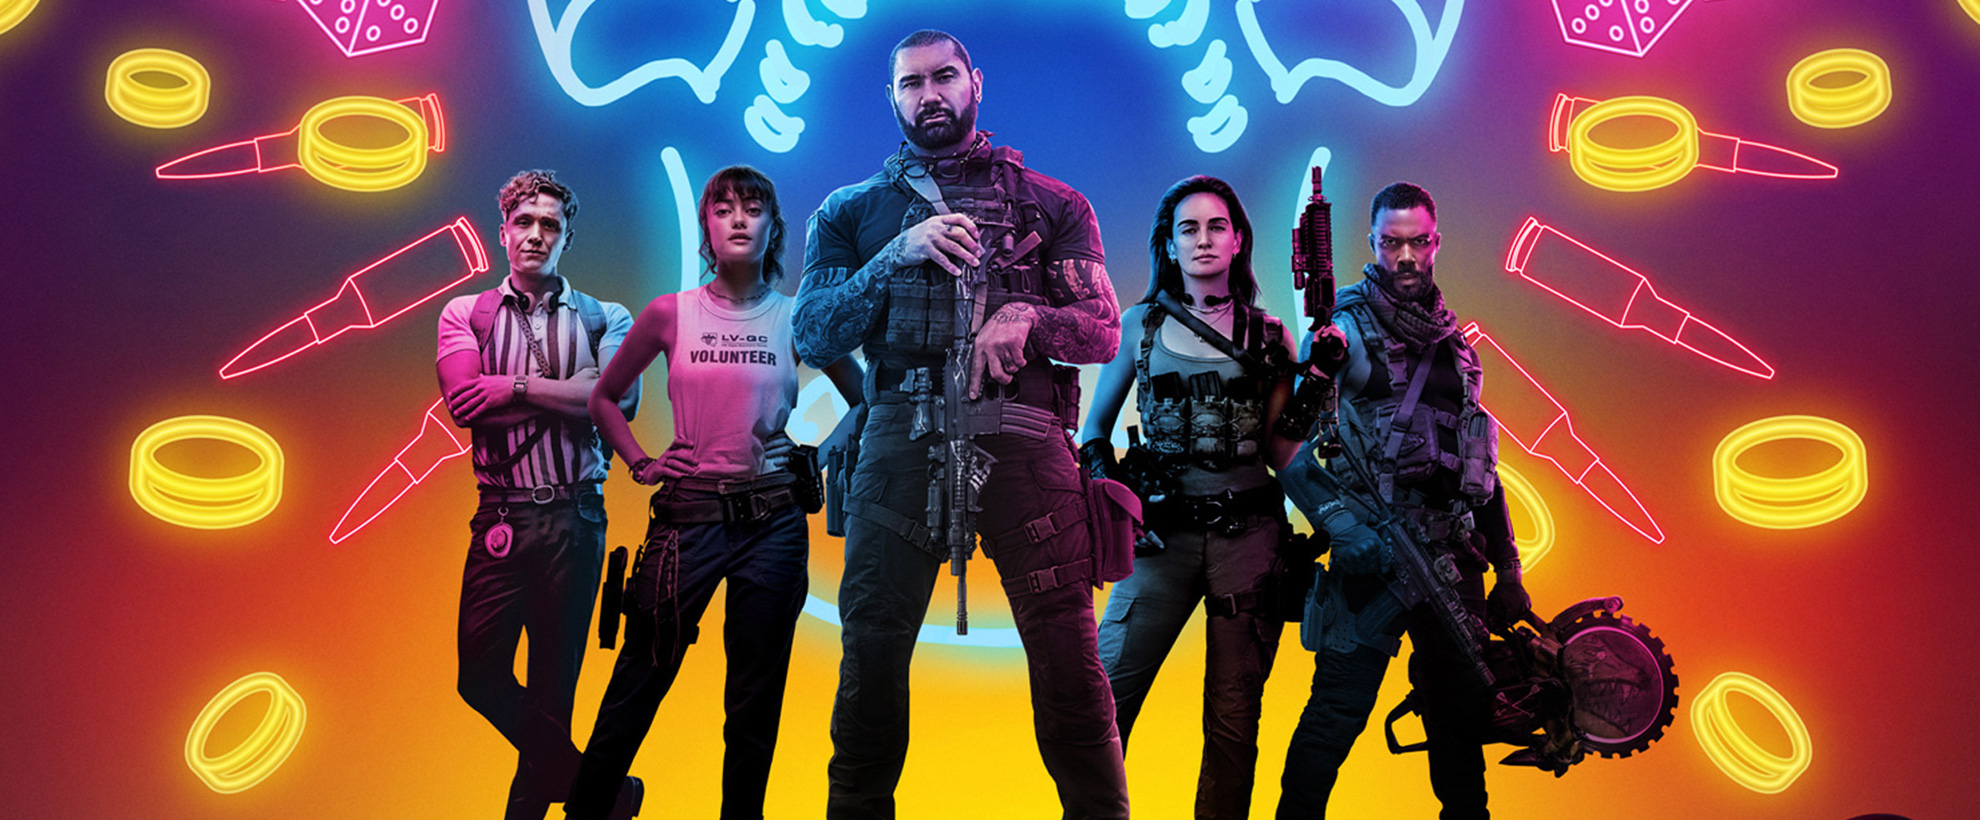 A neon poster featuring the cast of Army of the Dead